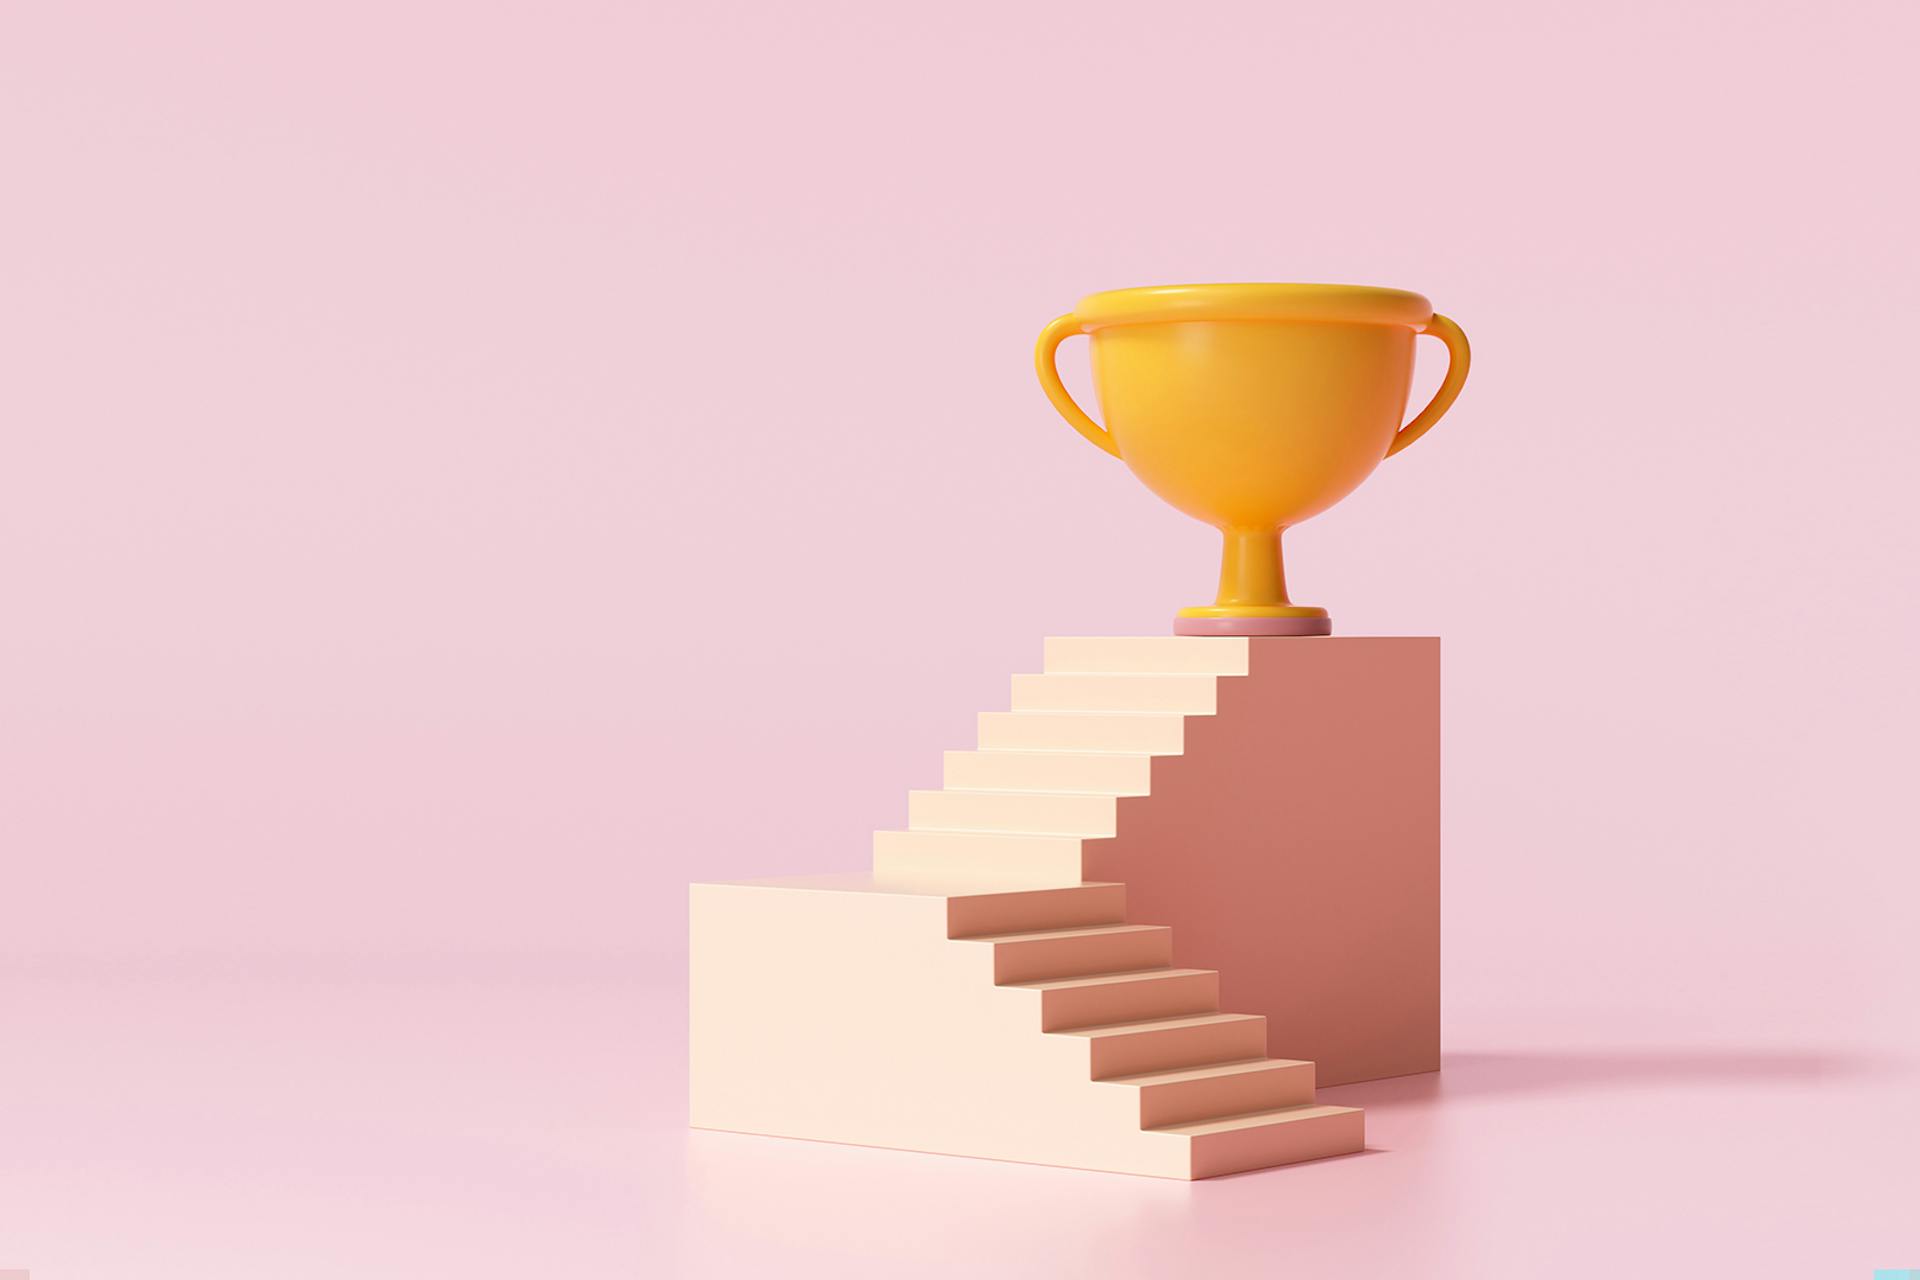 The path to social media management success involves several steps. In this blog post, we outline that process. This image depicts a series of steps with a gold trophy at the top.